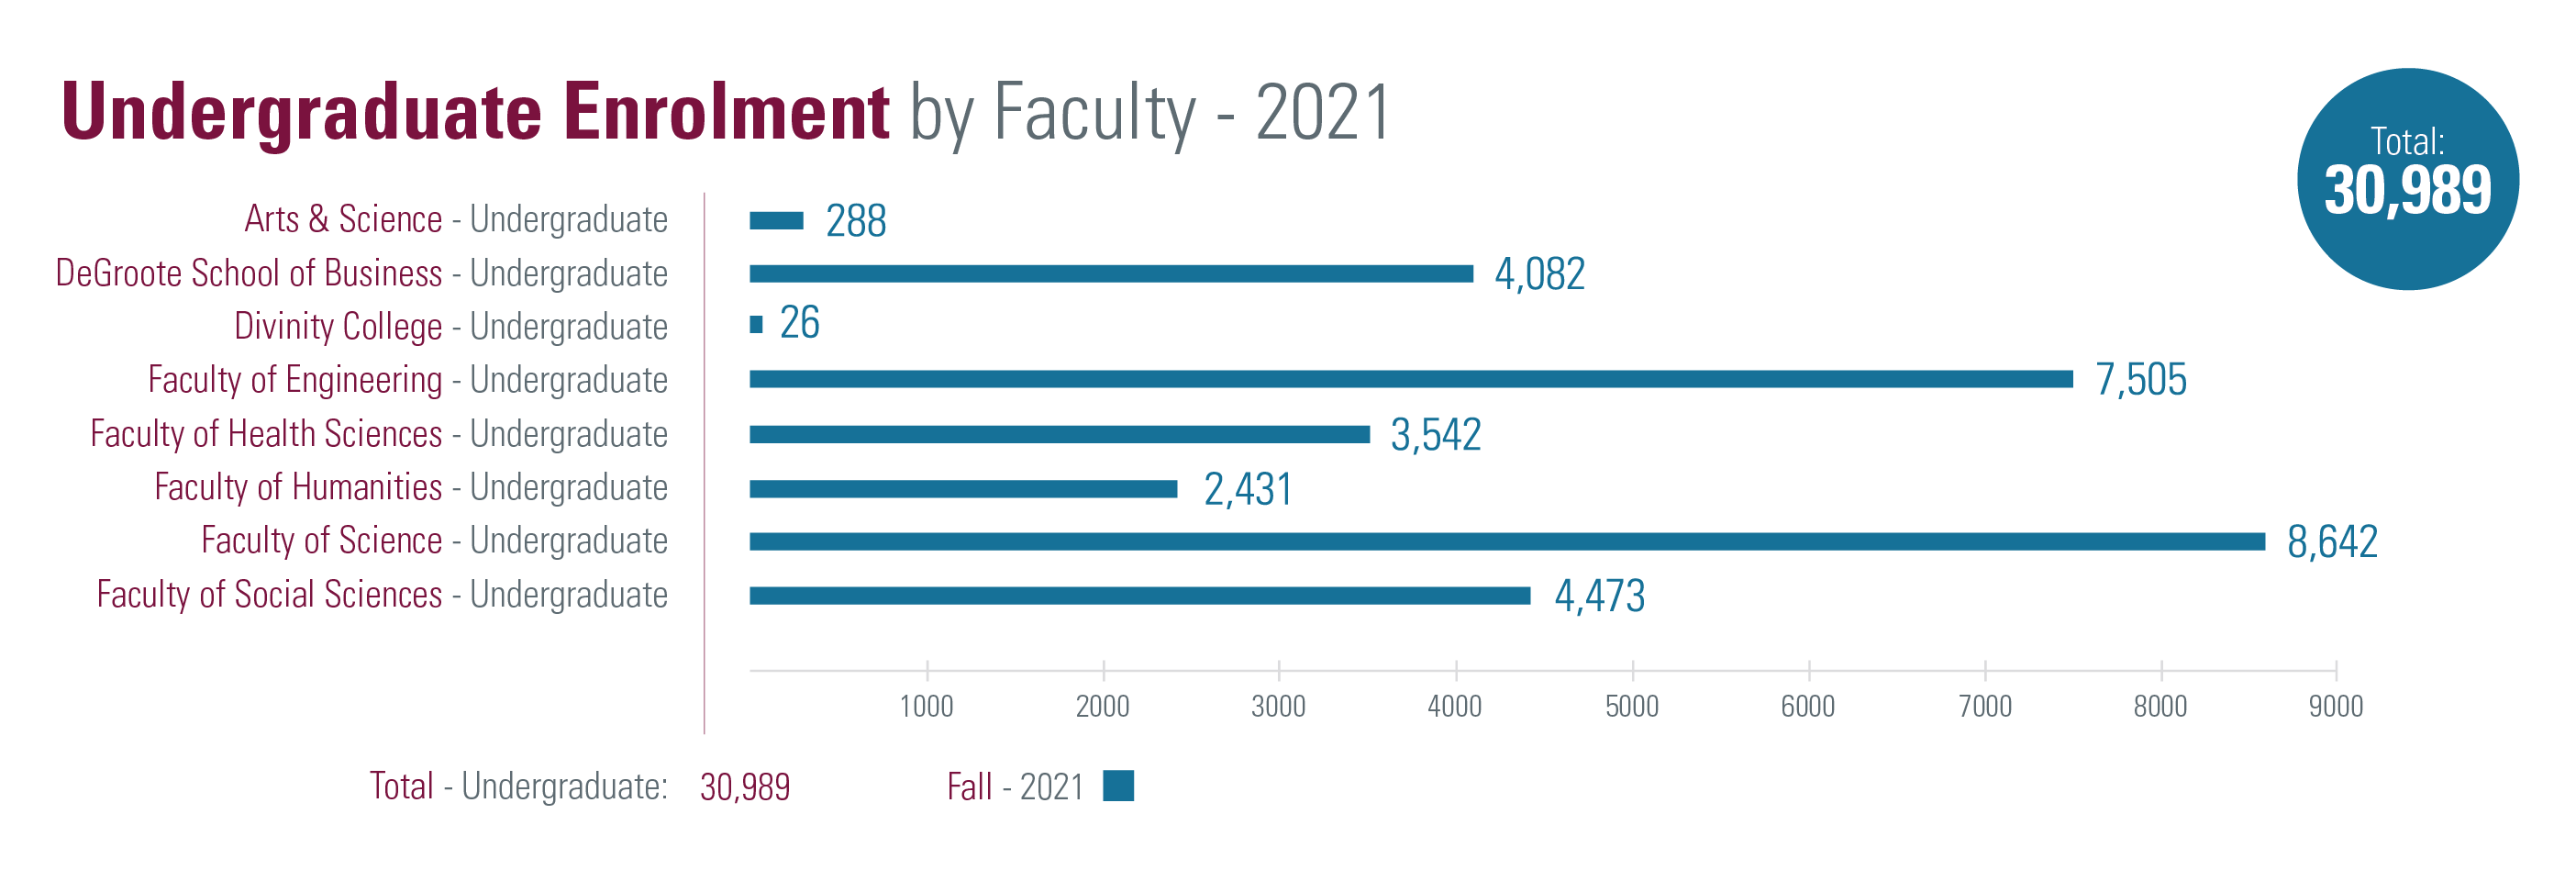 Undergraduate enrolment by Faculty for Fall 2021 totalling 30,989. Faculty breakdowns with each term identified: Arts & Science (288); DeGroote School of Business (4082); Divinity College (26); Faculty of Engineering (7505); Faculty of Health Sciences (3542); Faculty of Humanities (2431); Faculty of Science (8642); Faculty of Social Sciences (4473)